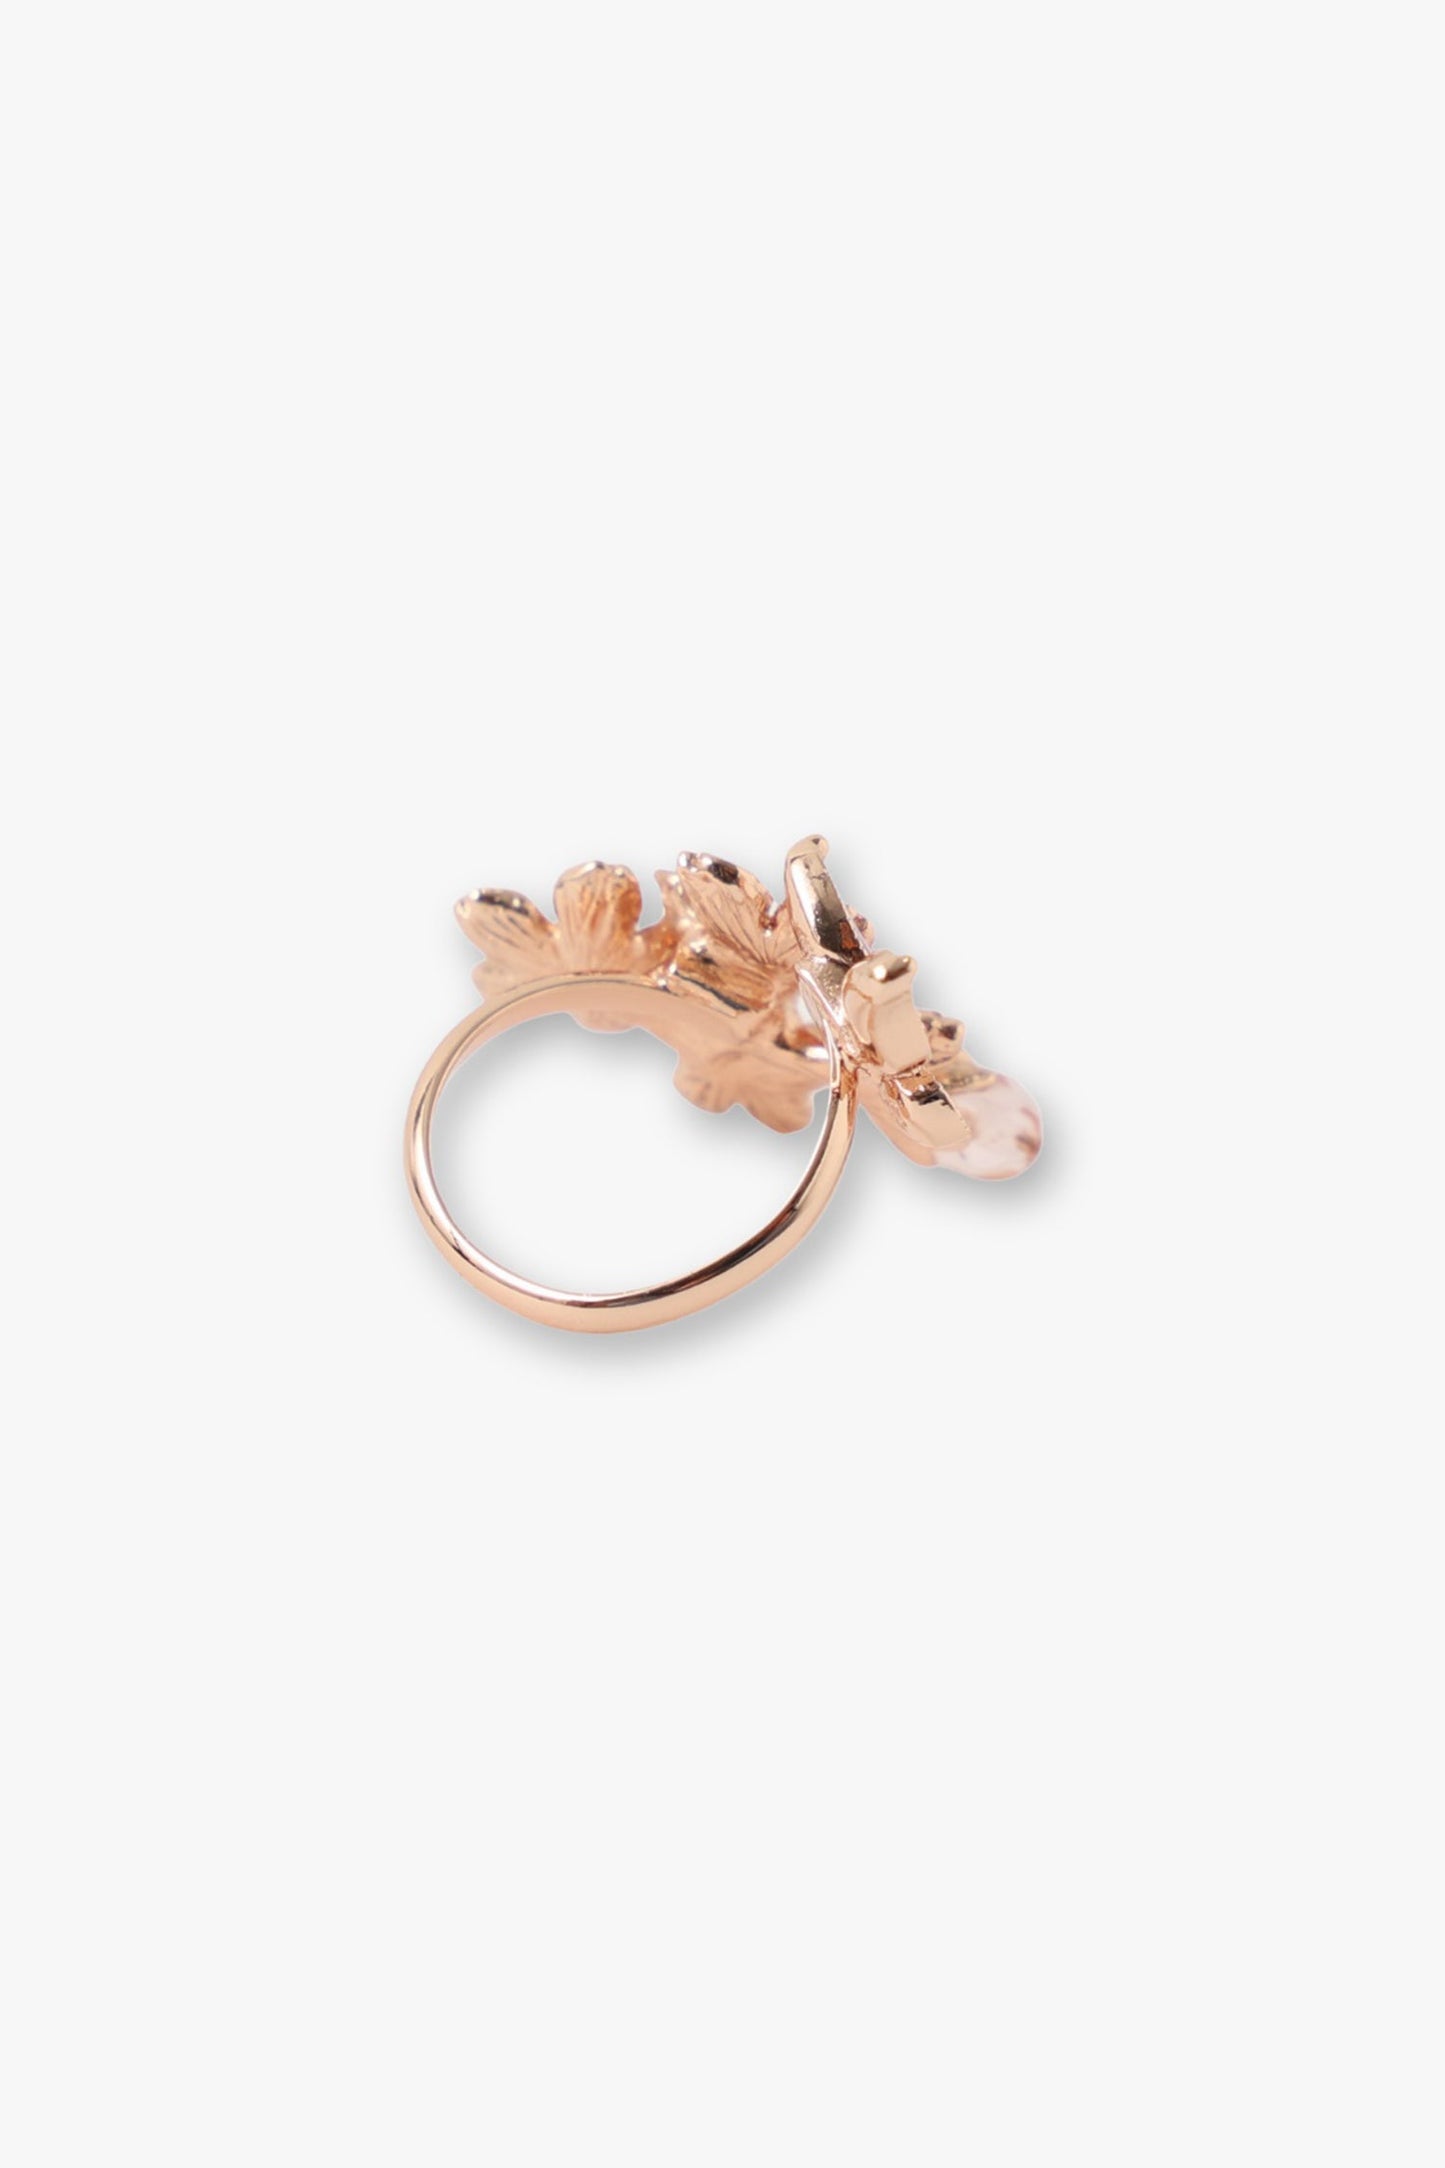 From bottom, Butterfly Cherry Blossom Ring is in Metal Pink and gold color plating